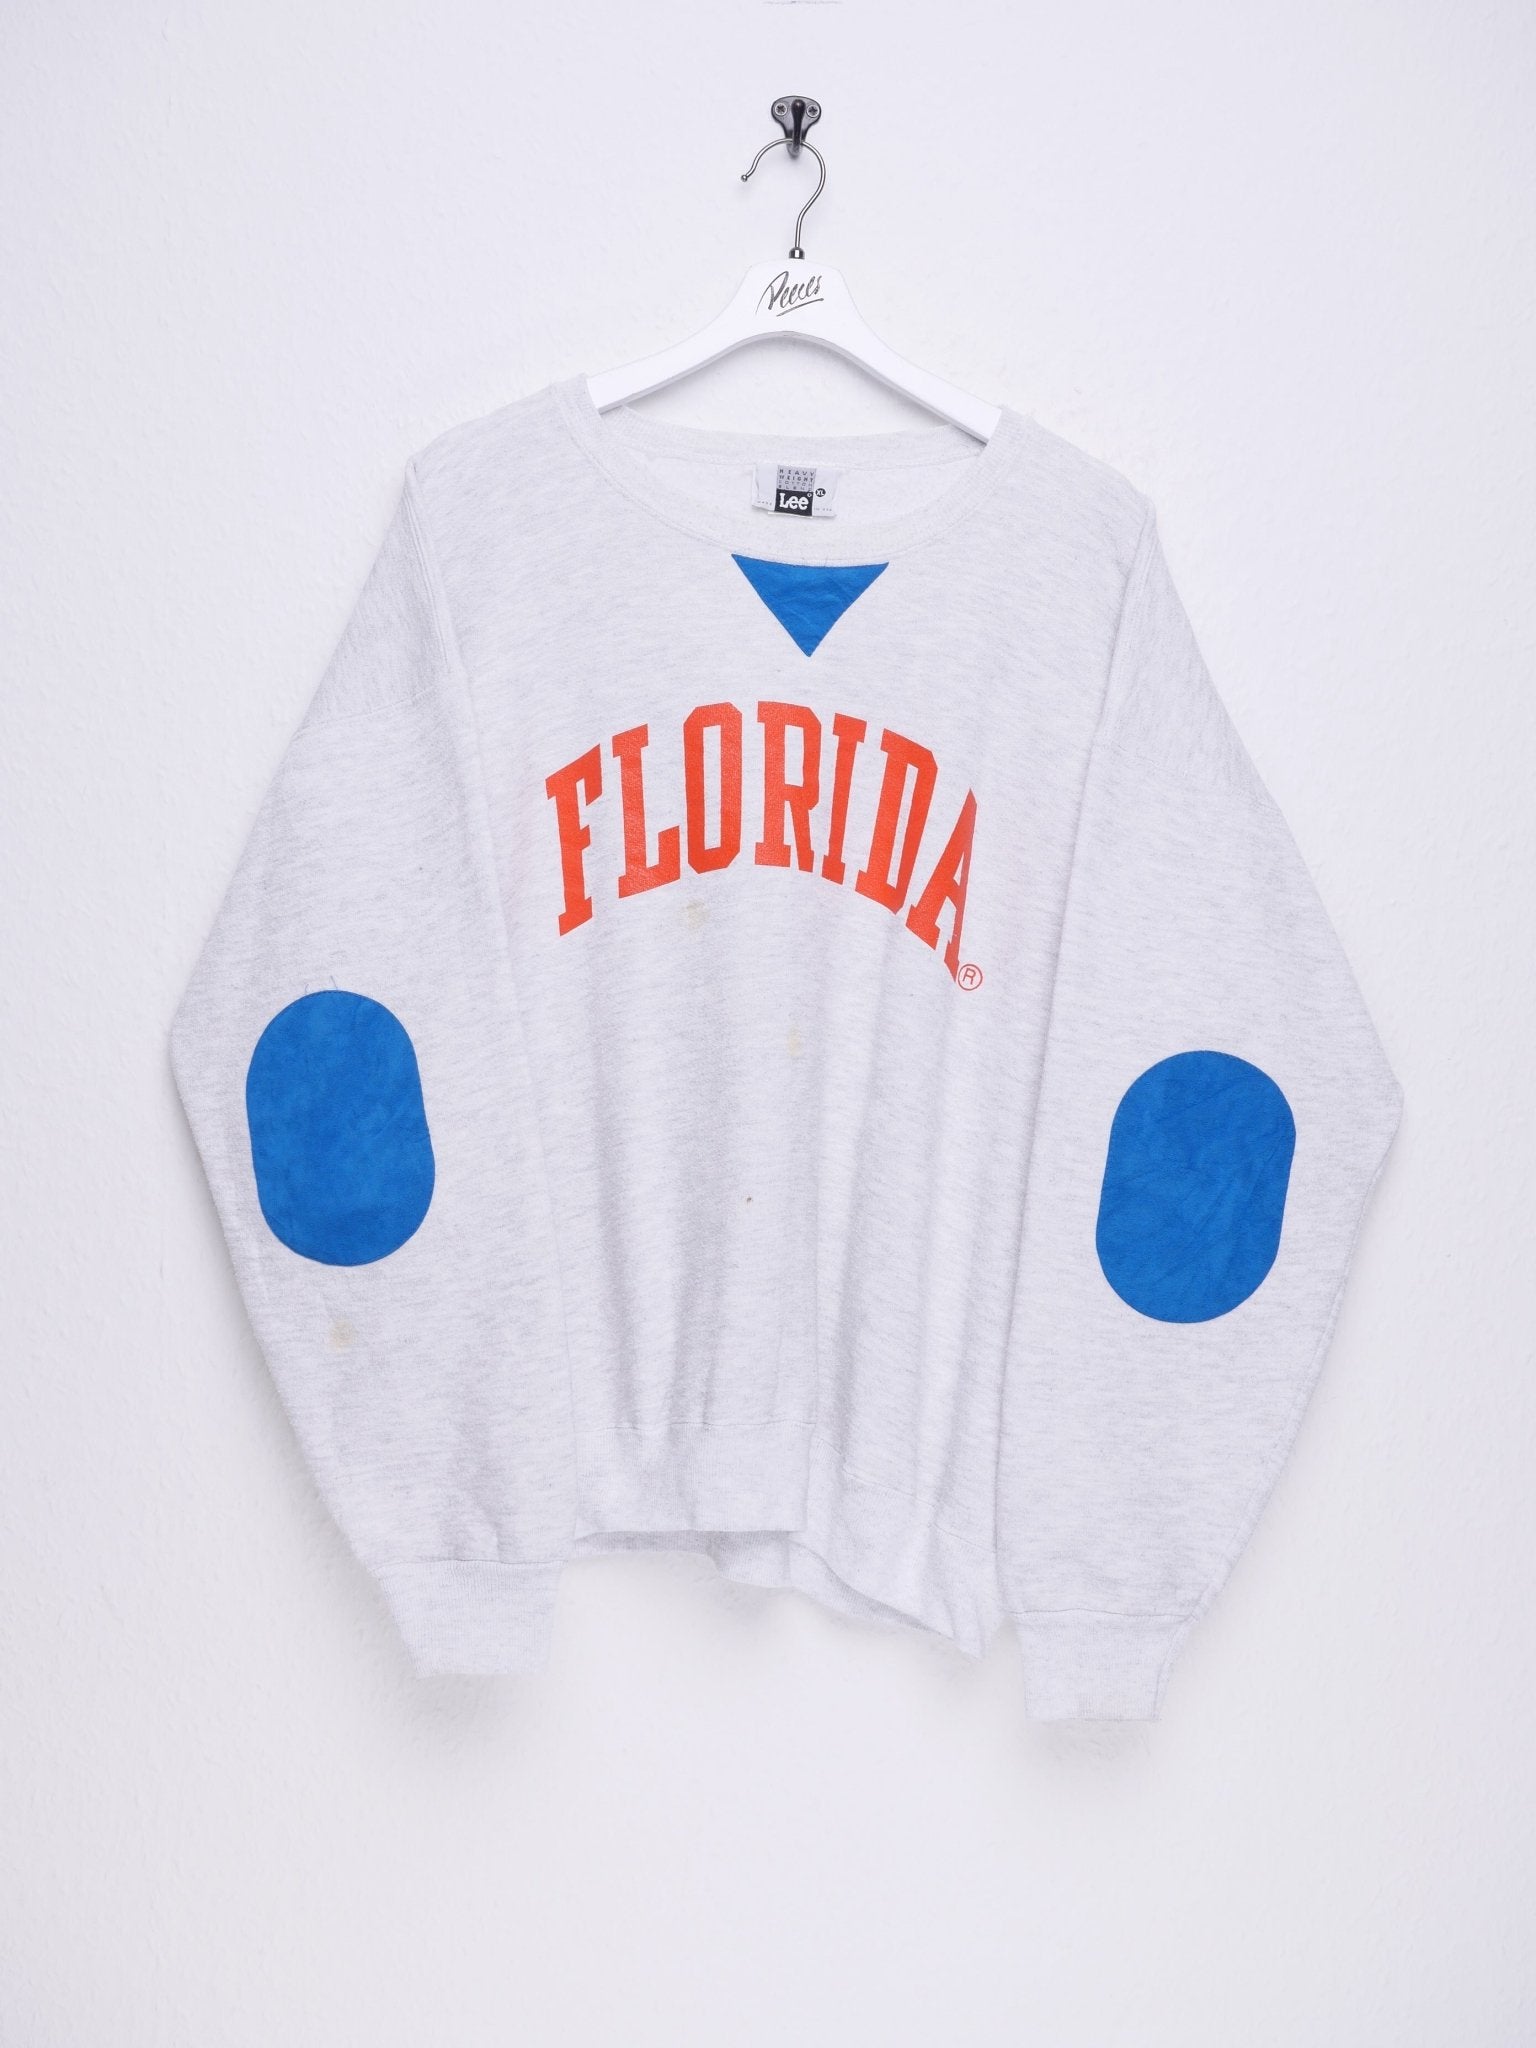 lee 'Florida' printed Spellout grey Sweater - Peeces